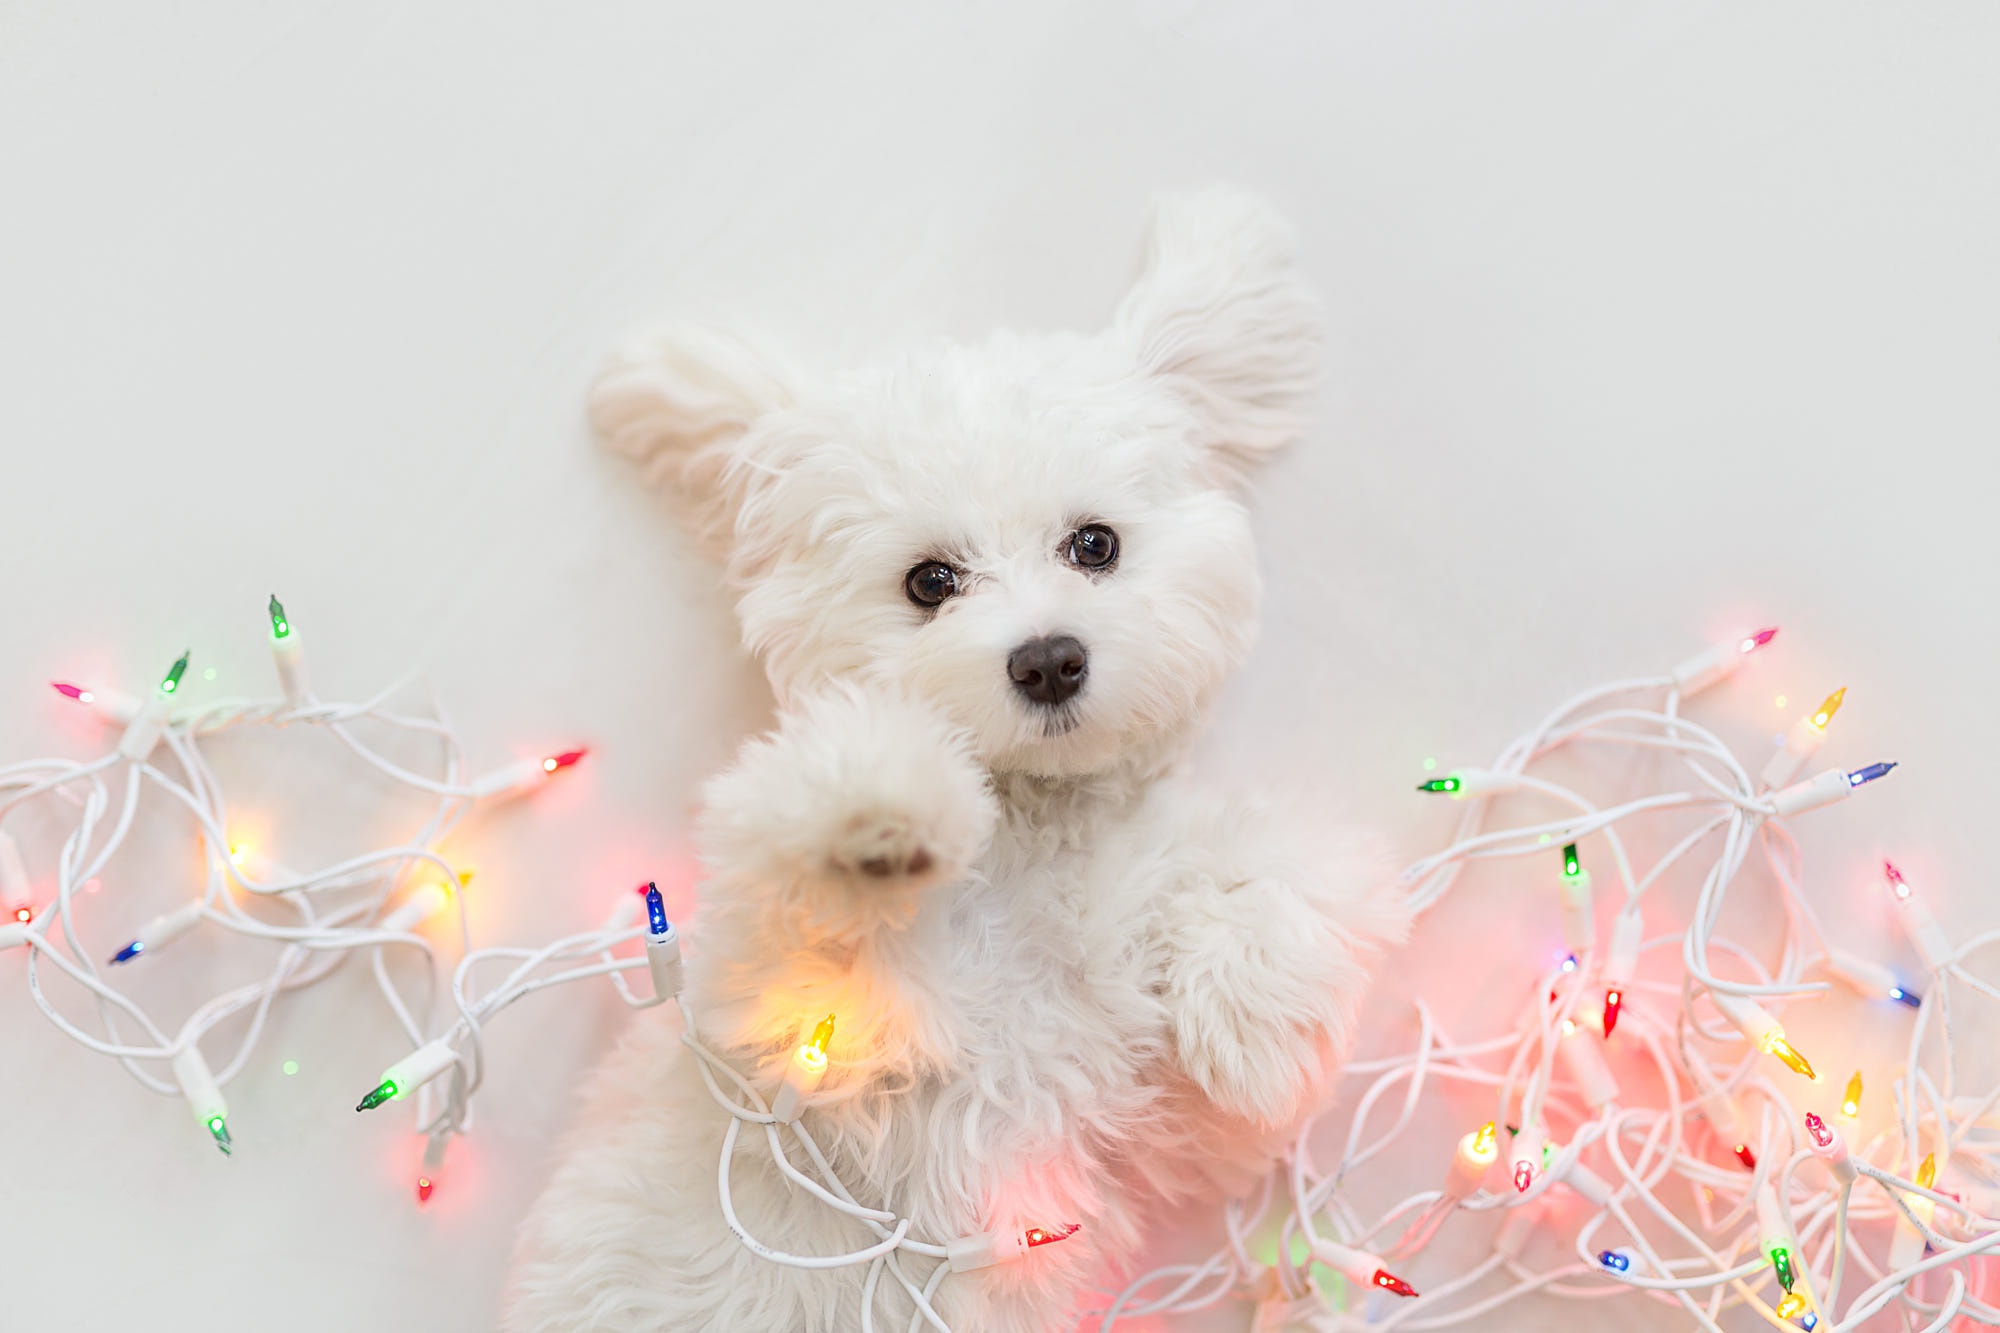 animal, west highland white terrier, baby animal, christmas lights, dog, puppy, dogs